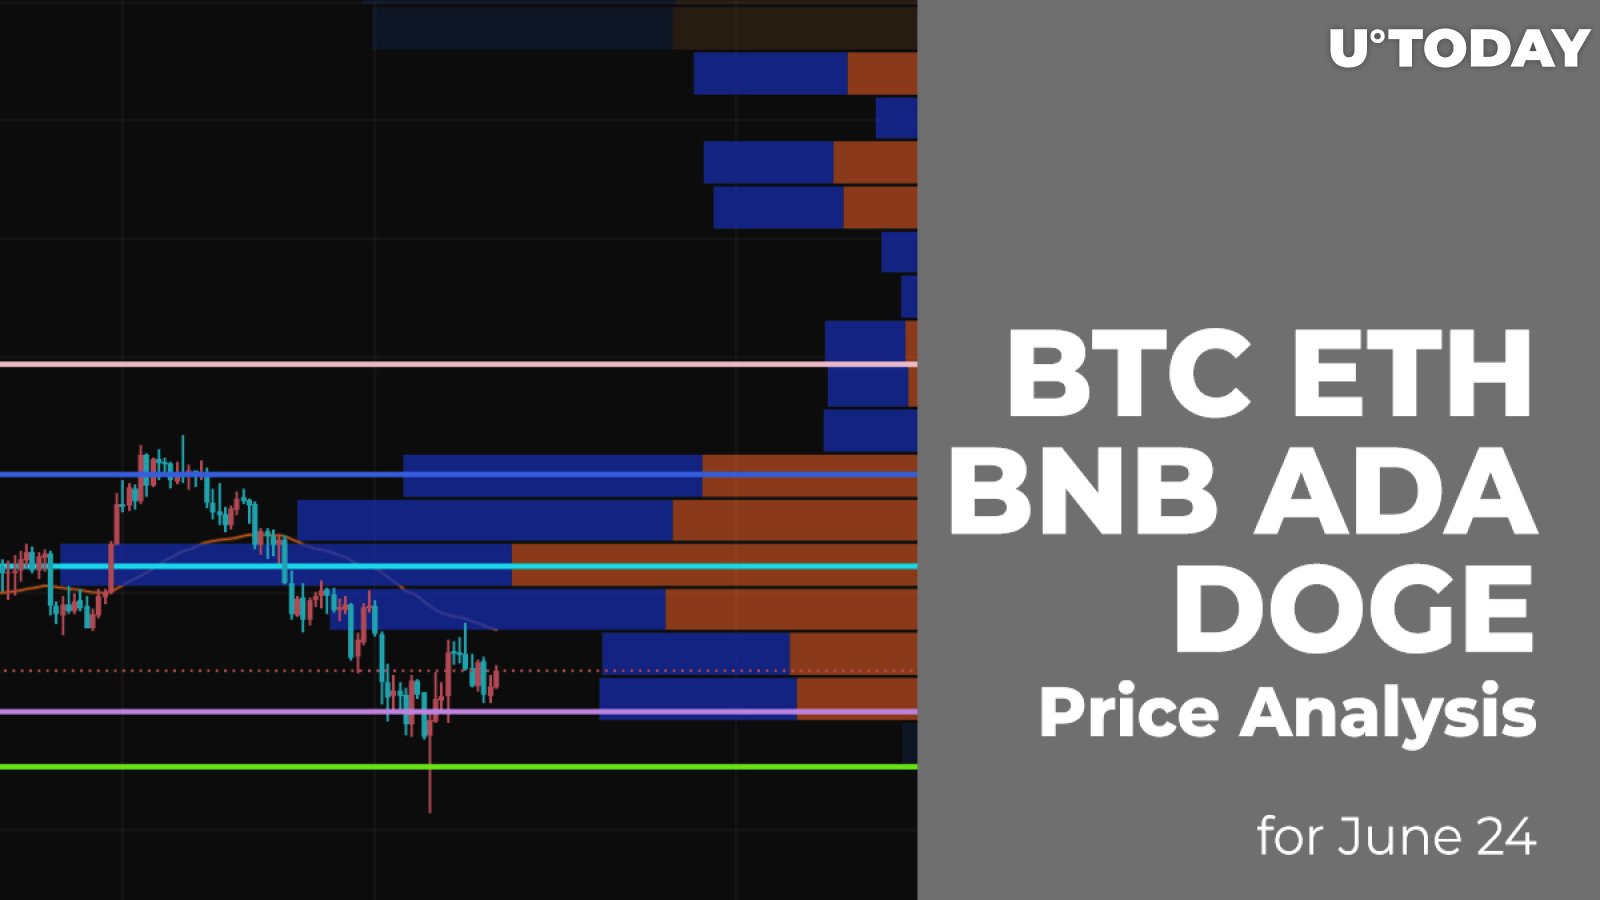 BTC, ETH, BNB, ADA and DOGE Price Analysis for June 24